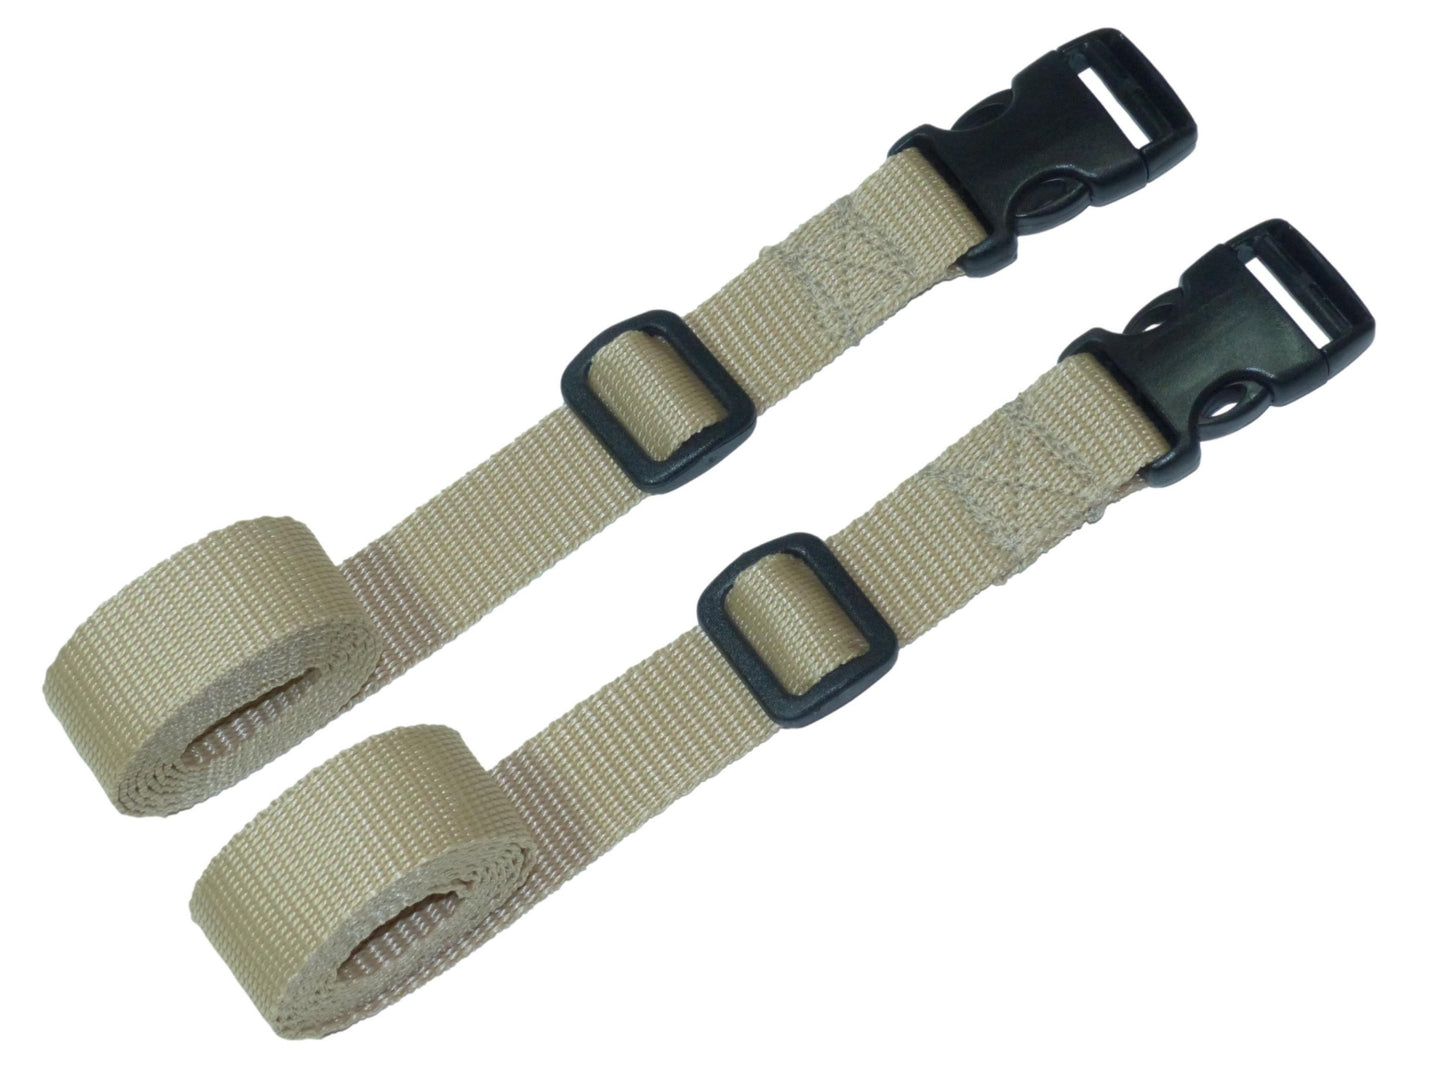 Benristraps 25mm Webbing Strap with Quick Release Buckle (Pair)